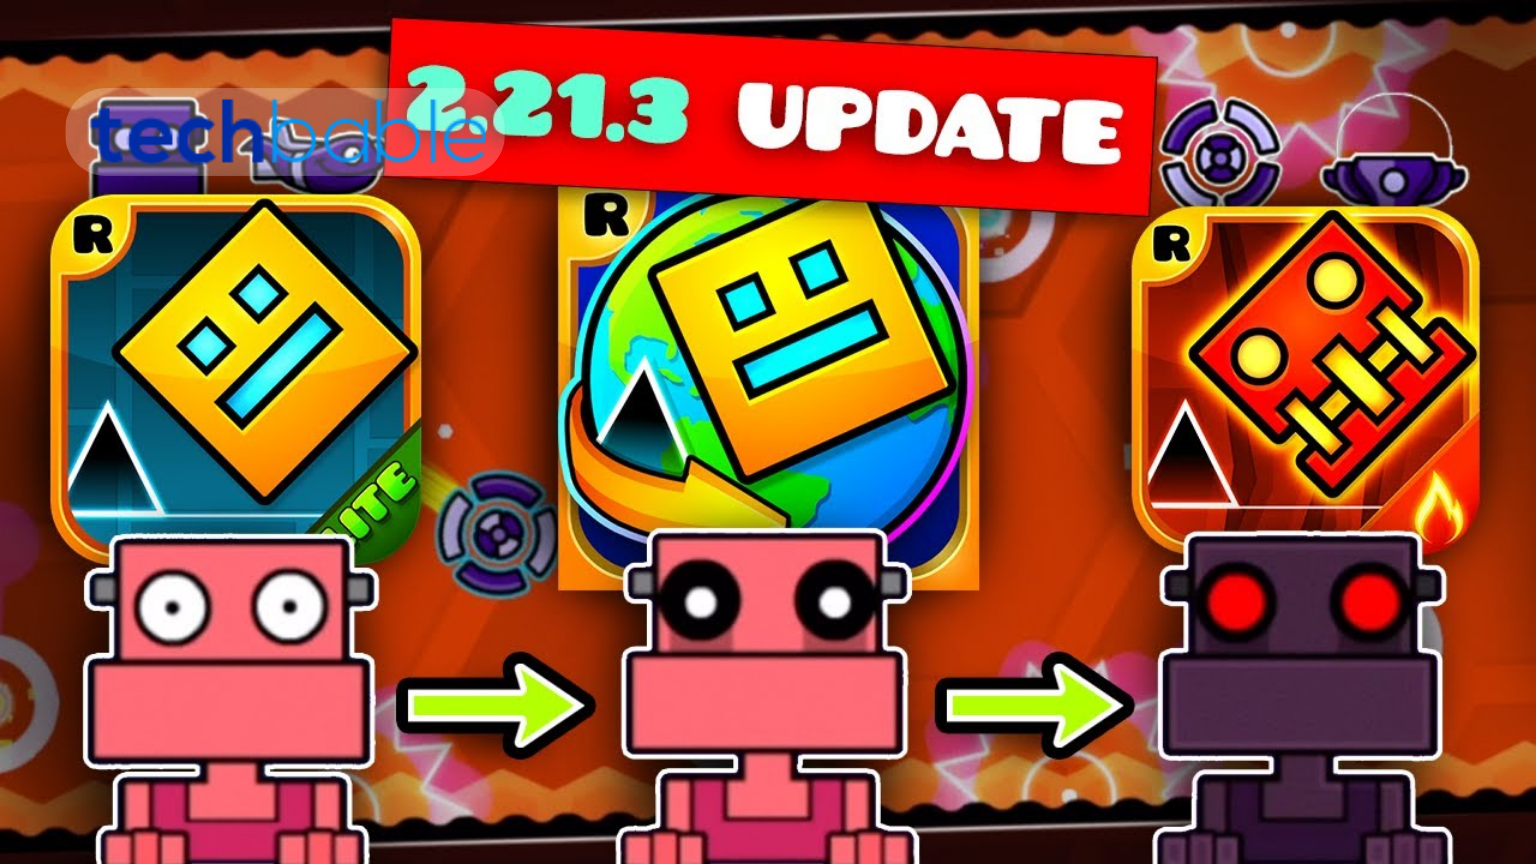 Features of Geometry Dash APK